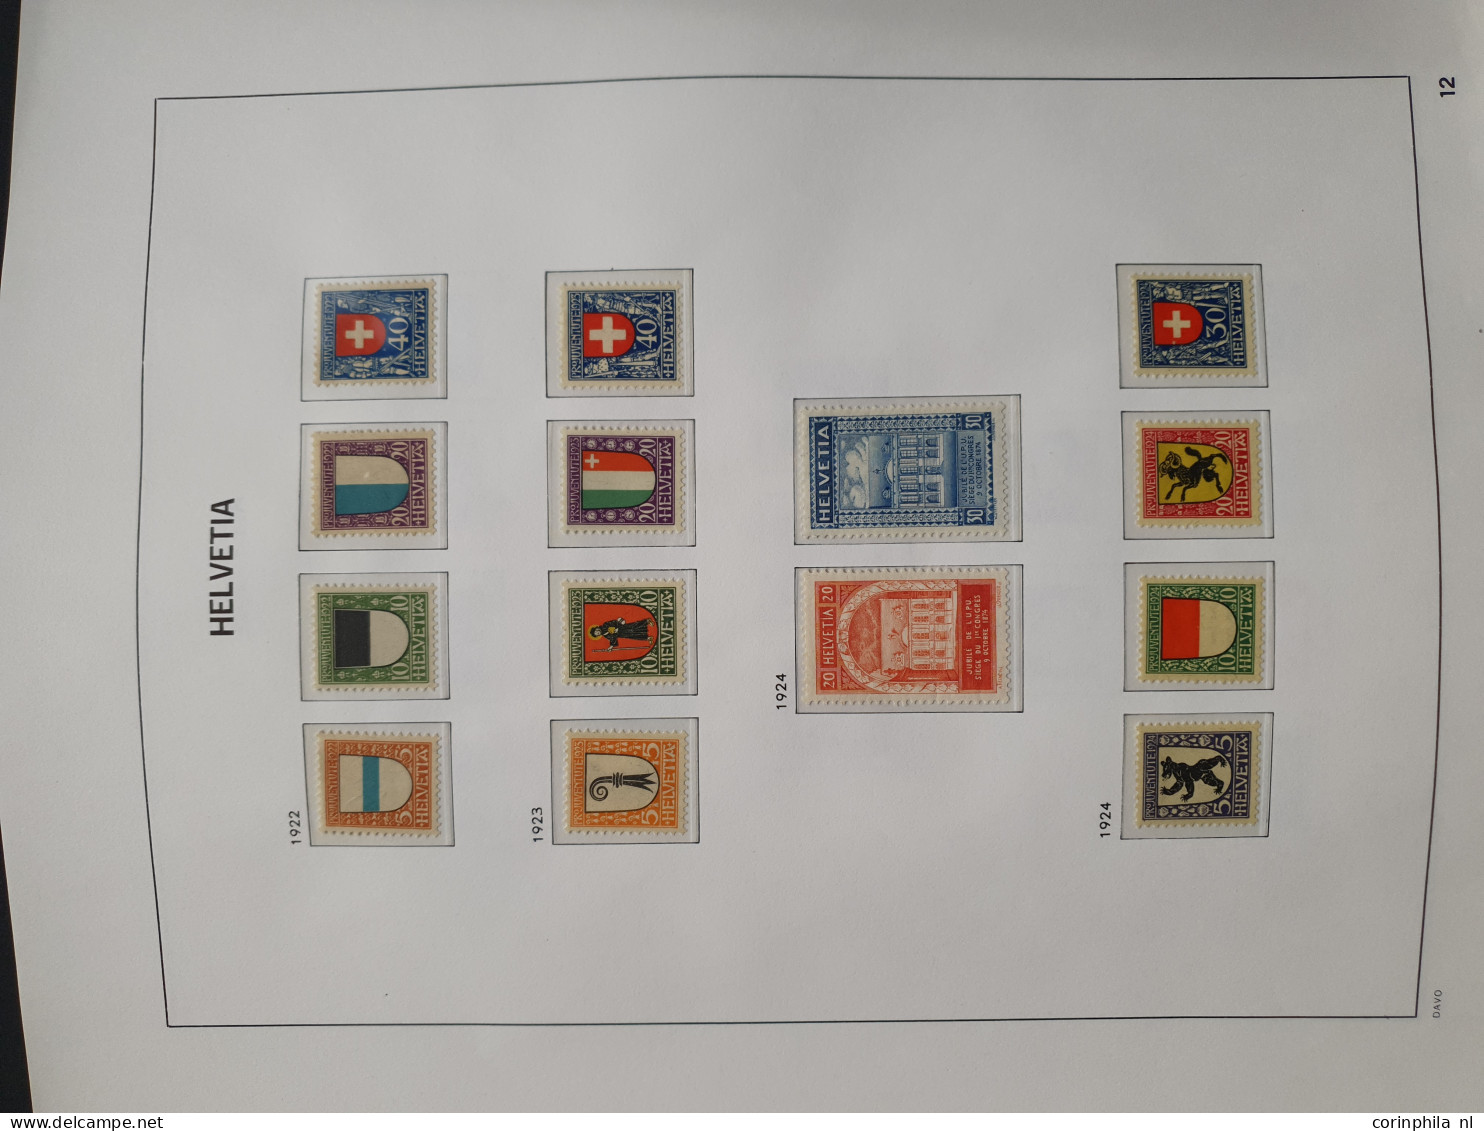 1846-1950 collection used and */** including many better items including Mi. 4 (*) Moser certificate, 10-12, Pro Juventu